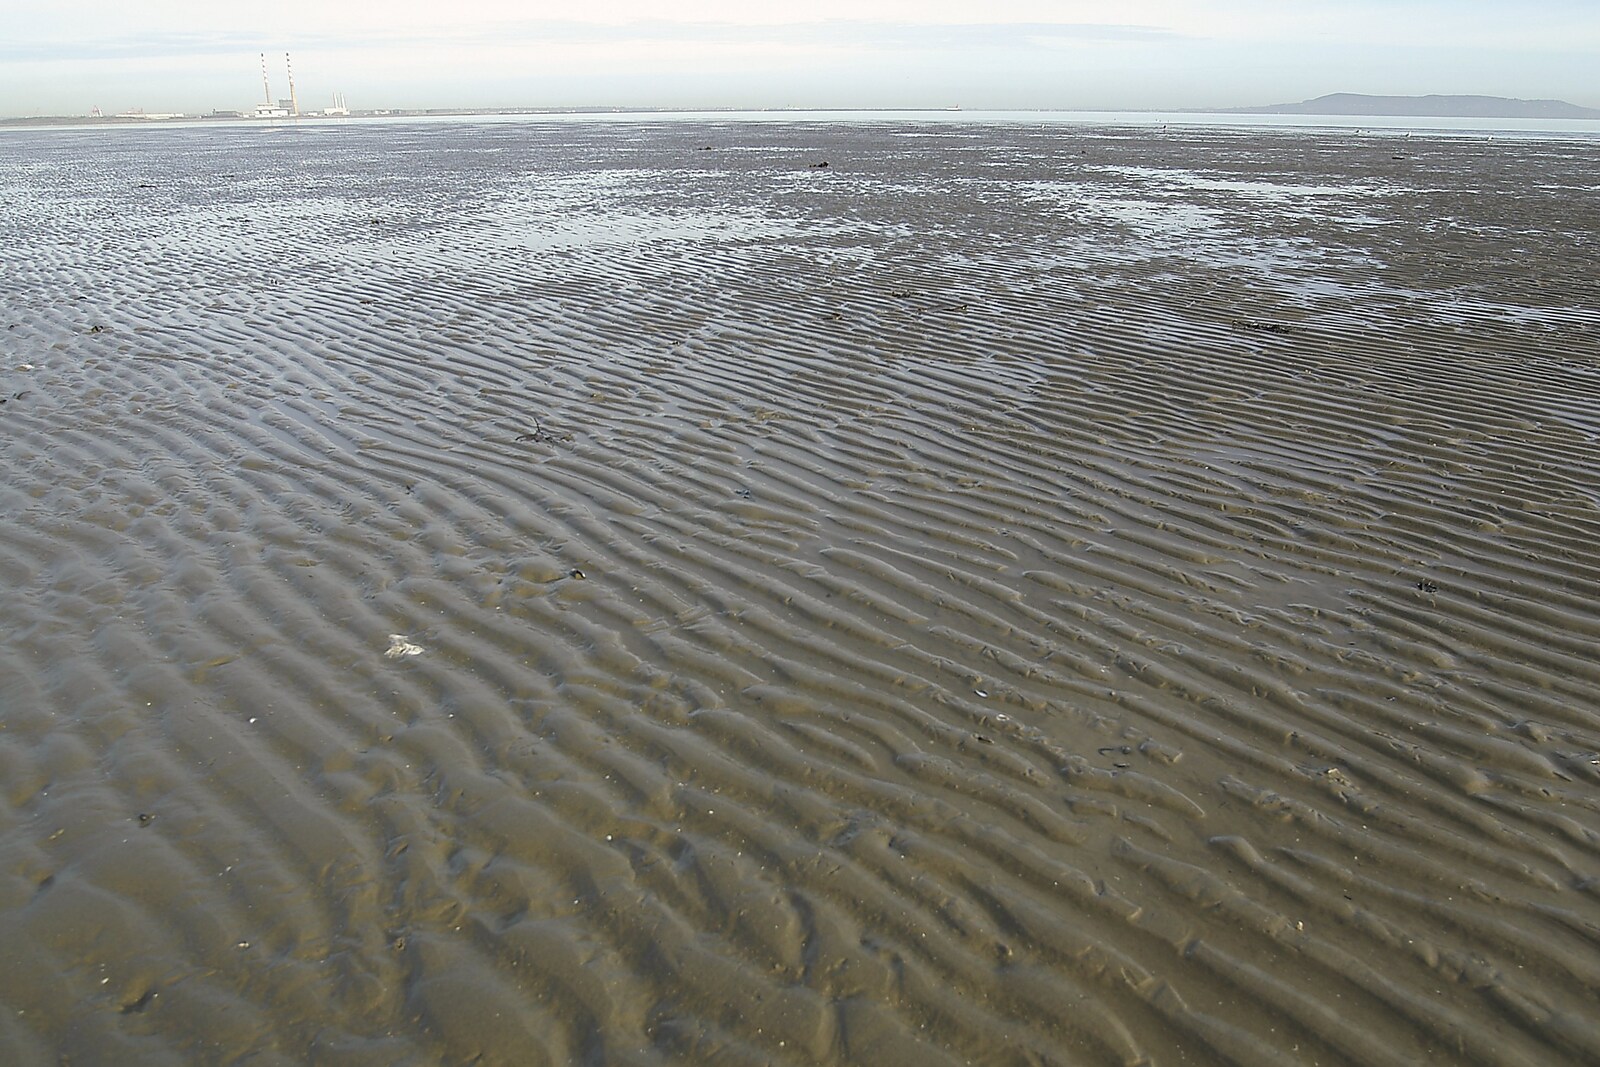 Rippled mud flats, exposed by the retreated tide from Blackrock Mornings, Dublin County, Ireland - 29th October 2006